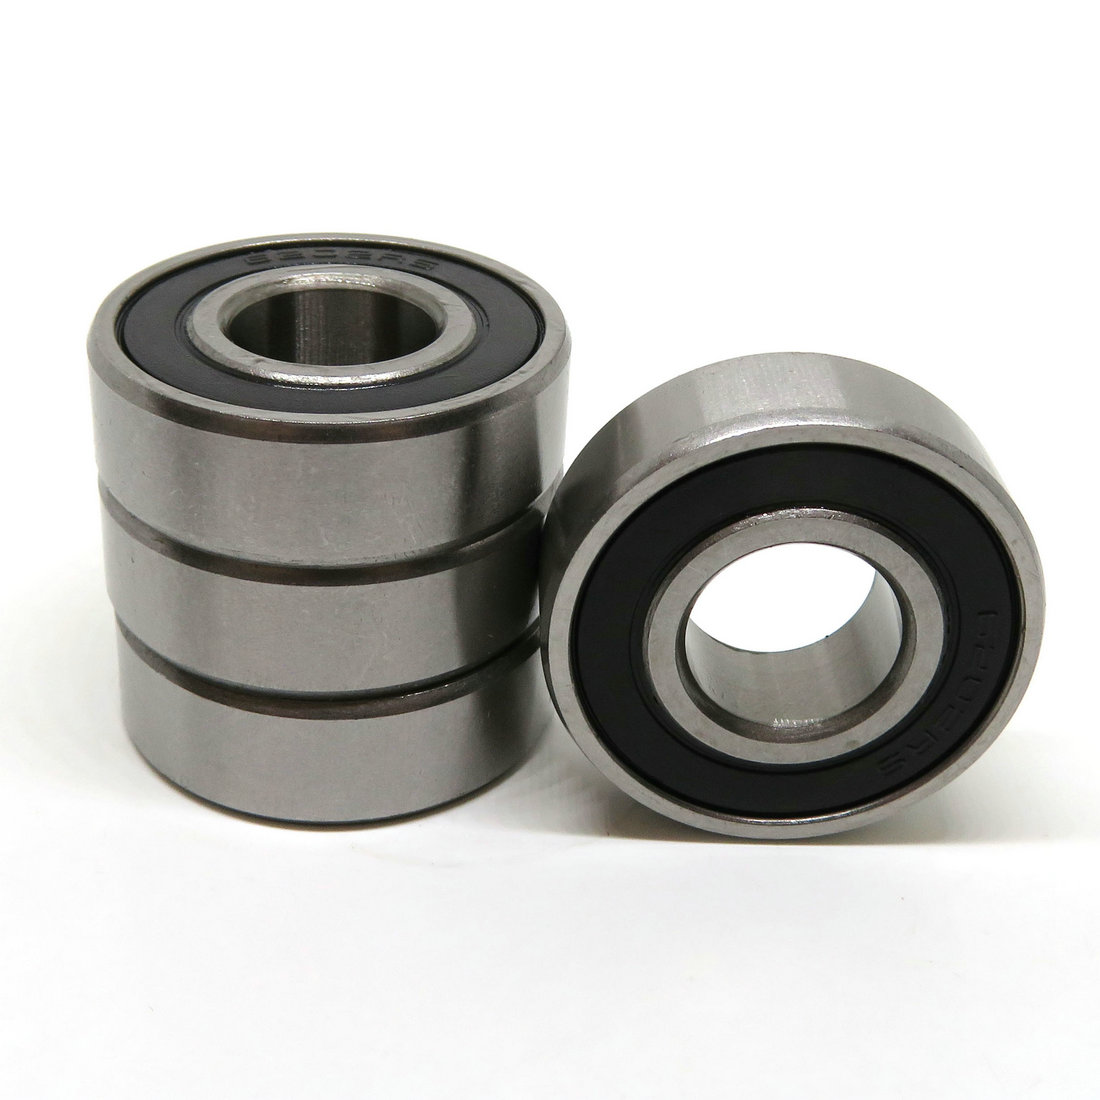 6205-2RS Bearings 25x52x15mm Ball Bearing Double Rubber Sealed Shielded For 3D Printer.jpg